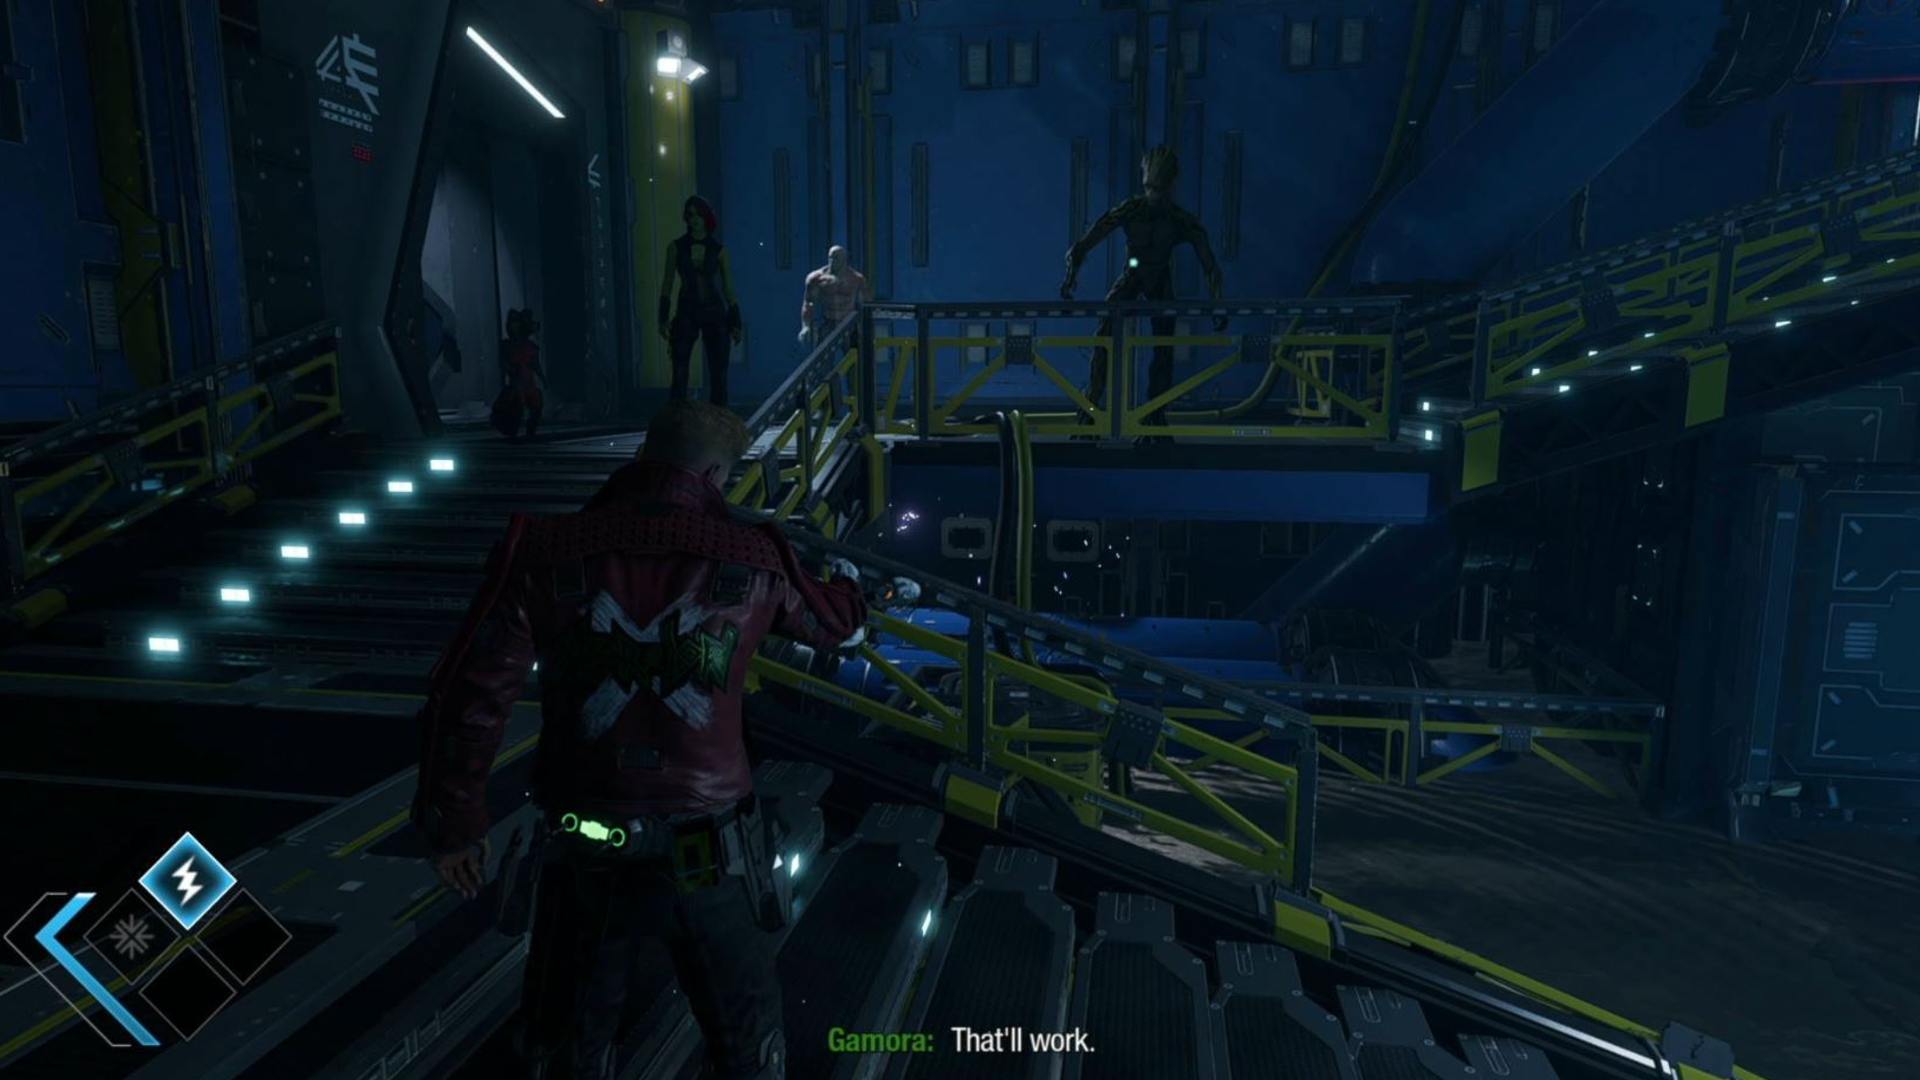 Guardians of the Galaxy outfit locations: Star-Lord is looking at the switch to turn off the electricity. 